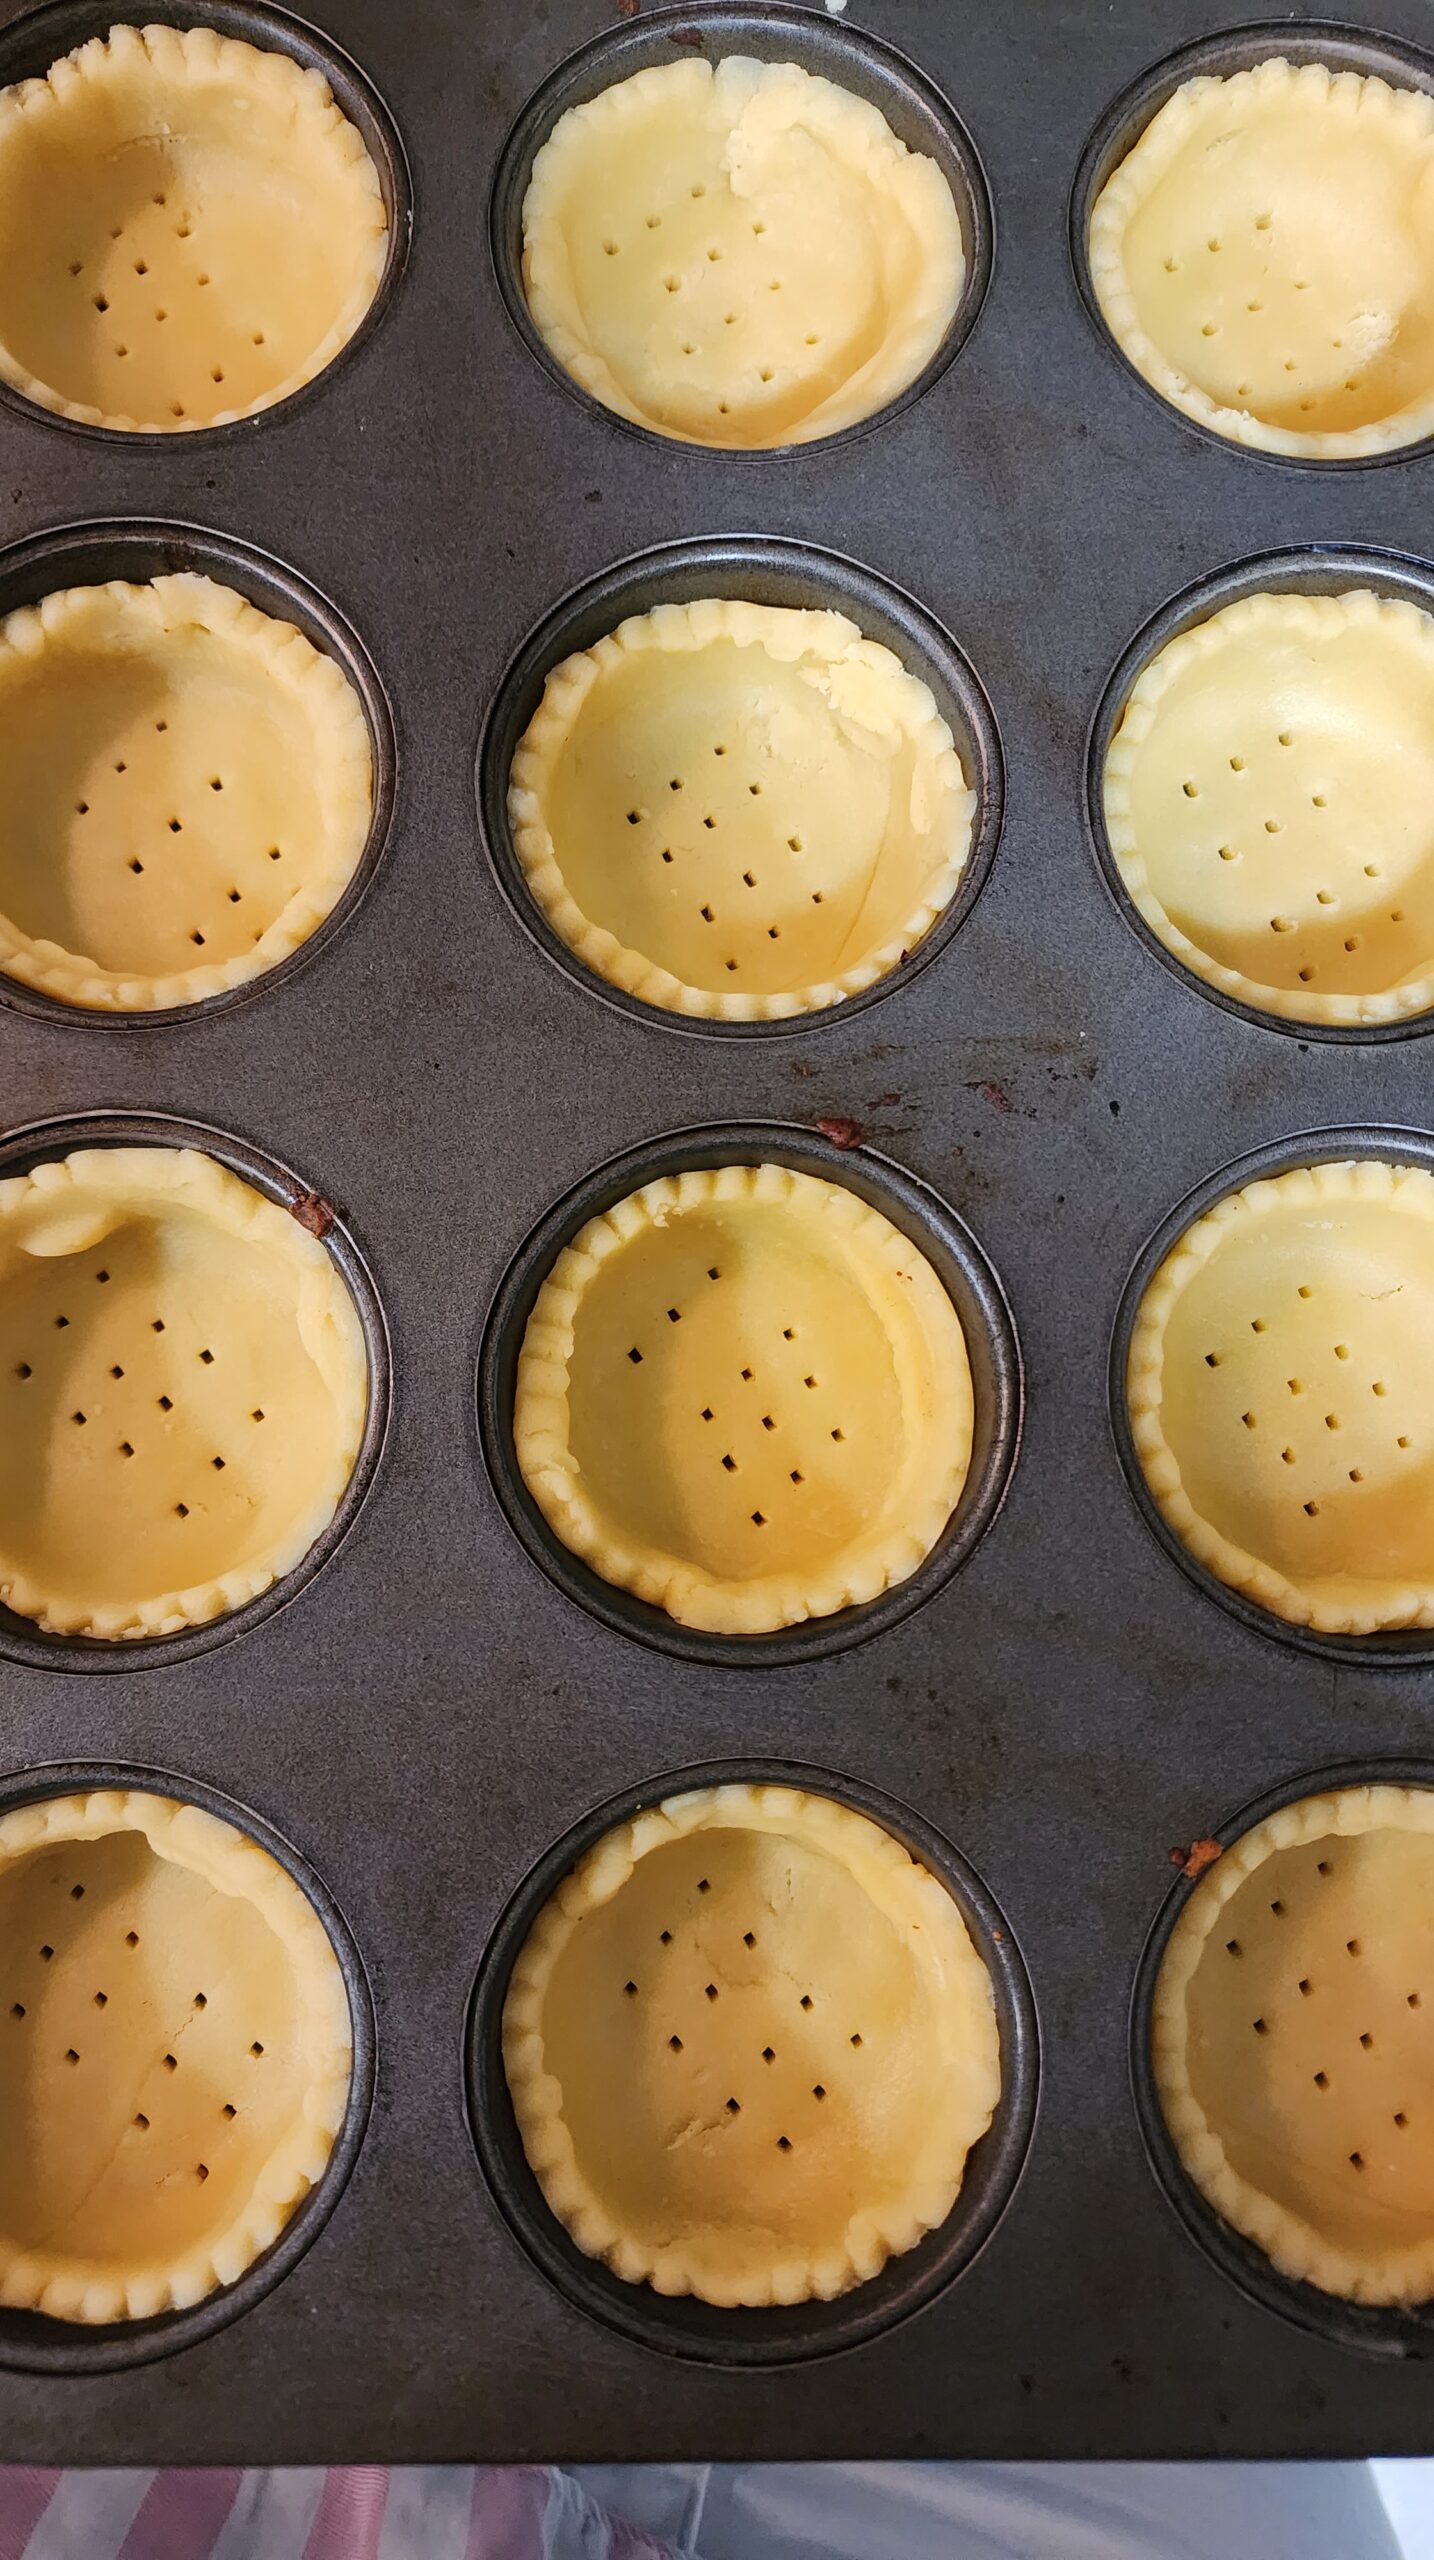 Pricked tart shells placed inside a muffin tray, ready to be baked